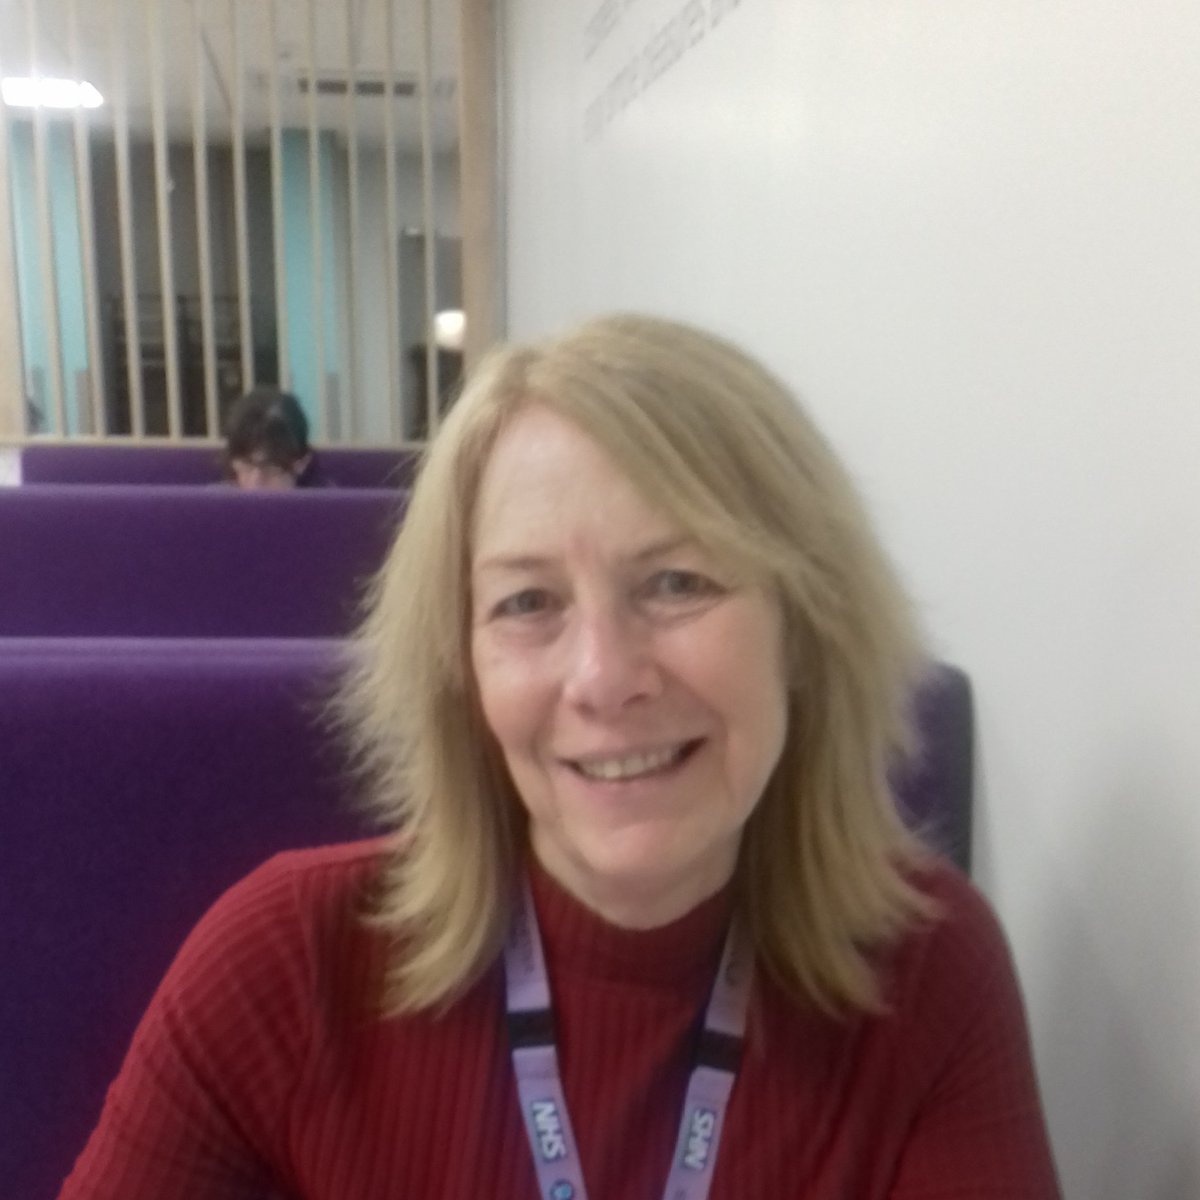 #DAY8 in our #WhosMyNavigatorCampaign introducing #Sue - she's got #BucketsOfExperience and we are so #Thrilled she decided 2 join us. History with #LDServices and #muchmuchmore. She's #wise #emotionallyintelligent n #SharpAsARazor - psted 2 #ArdwickAndLongsight #Nbrhd @mcrlco